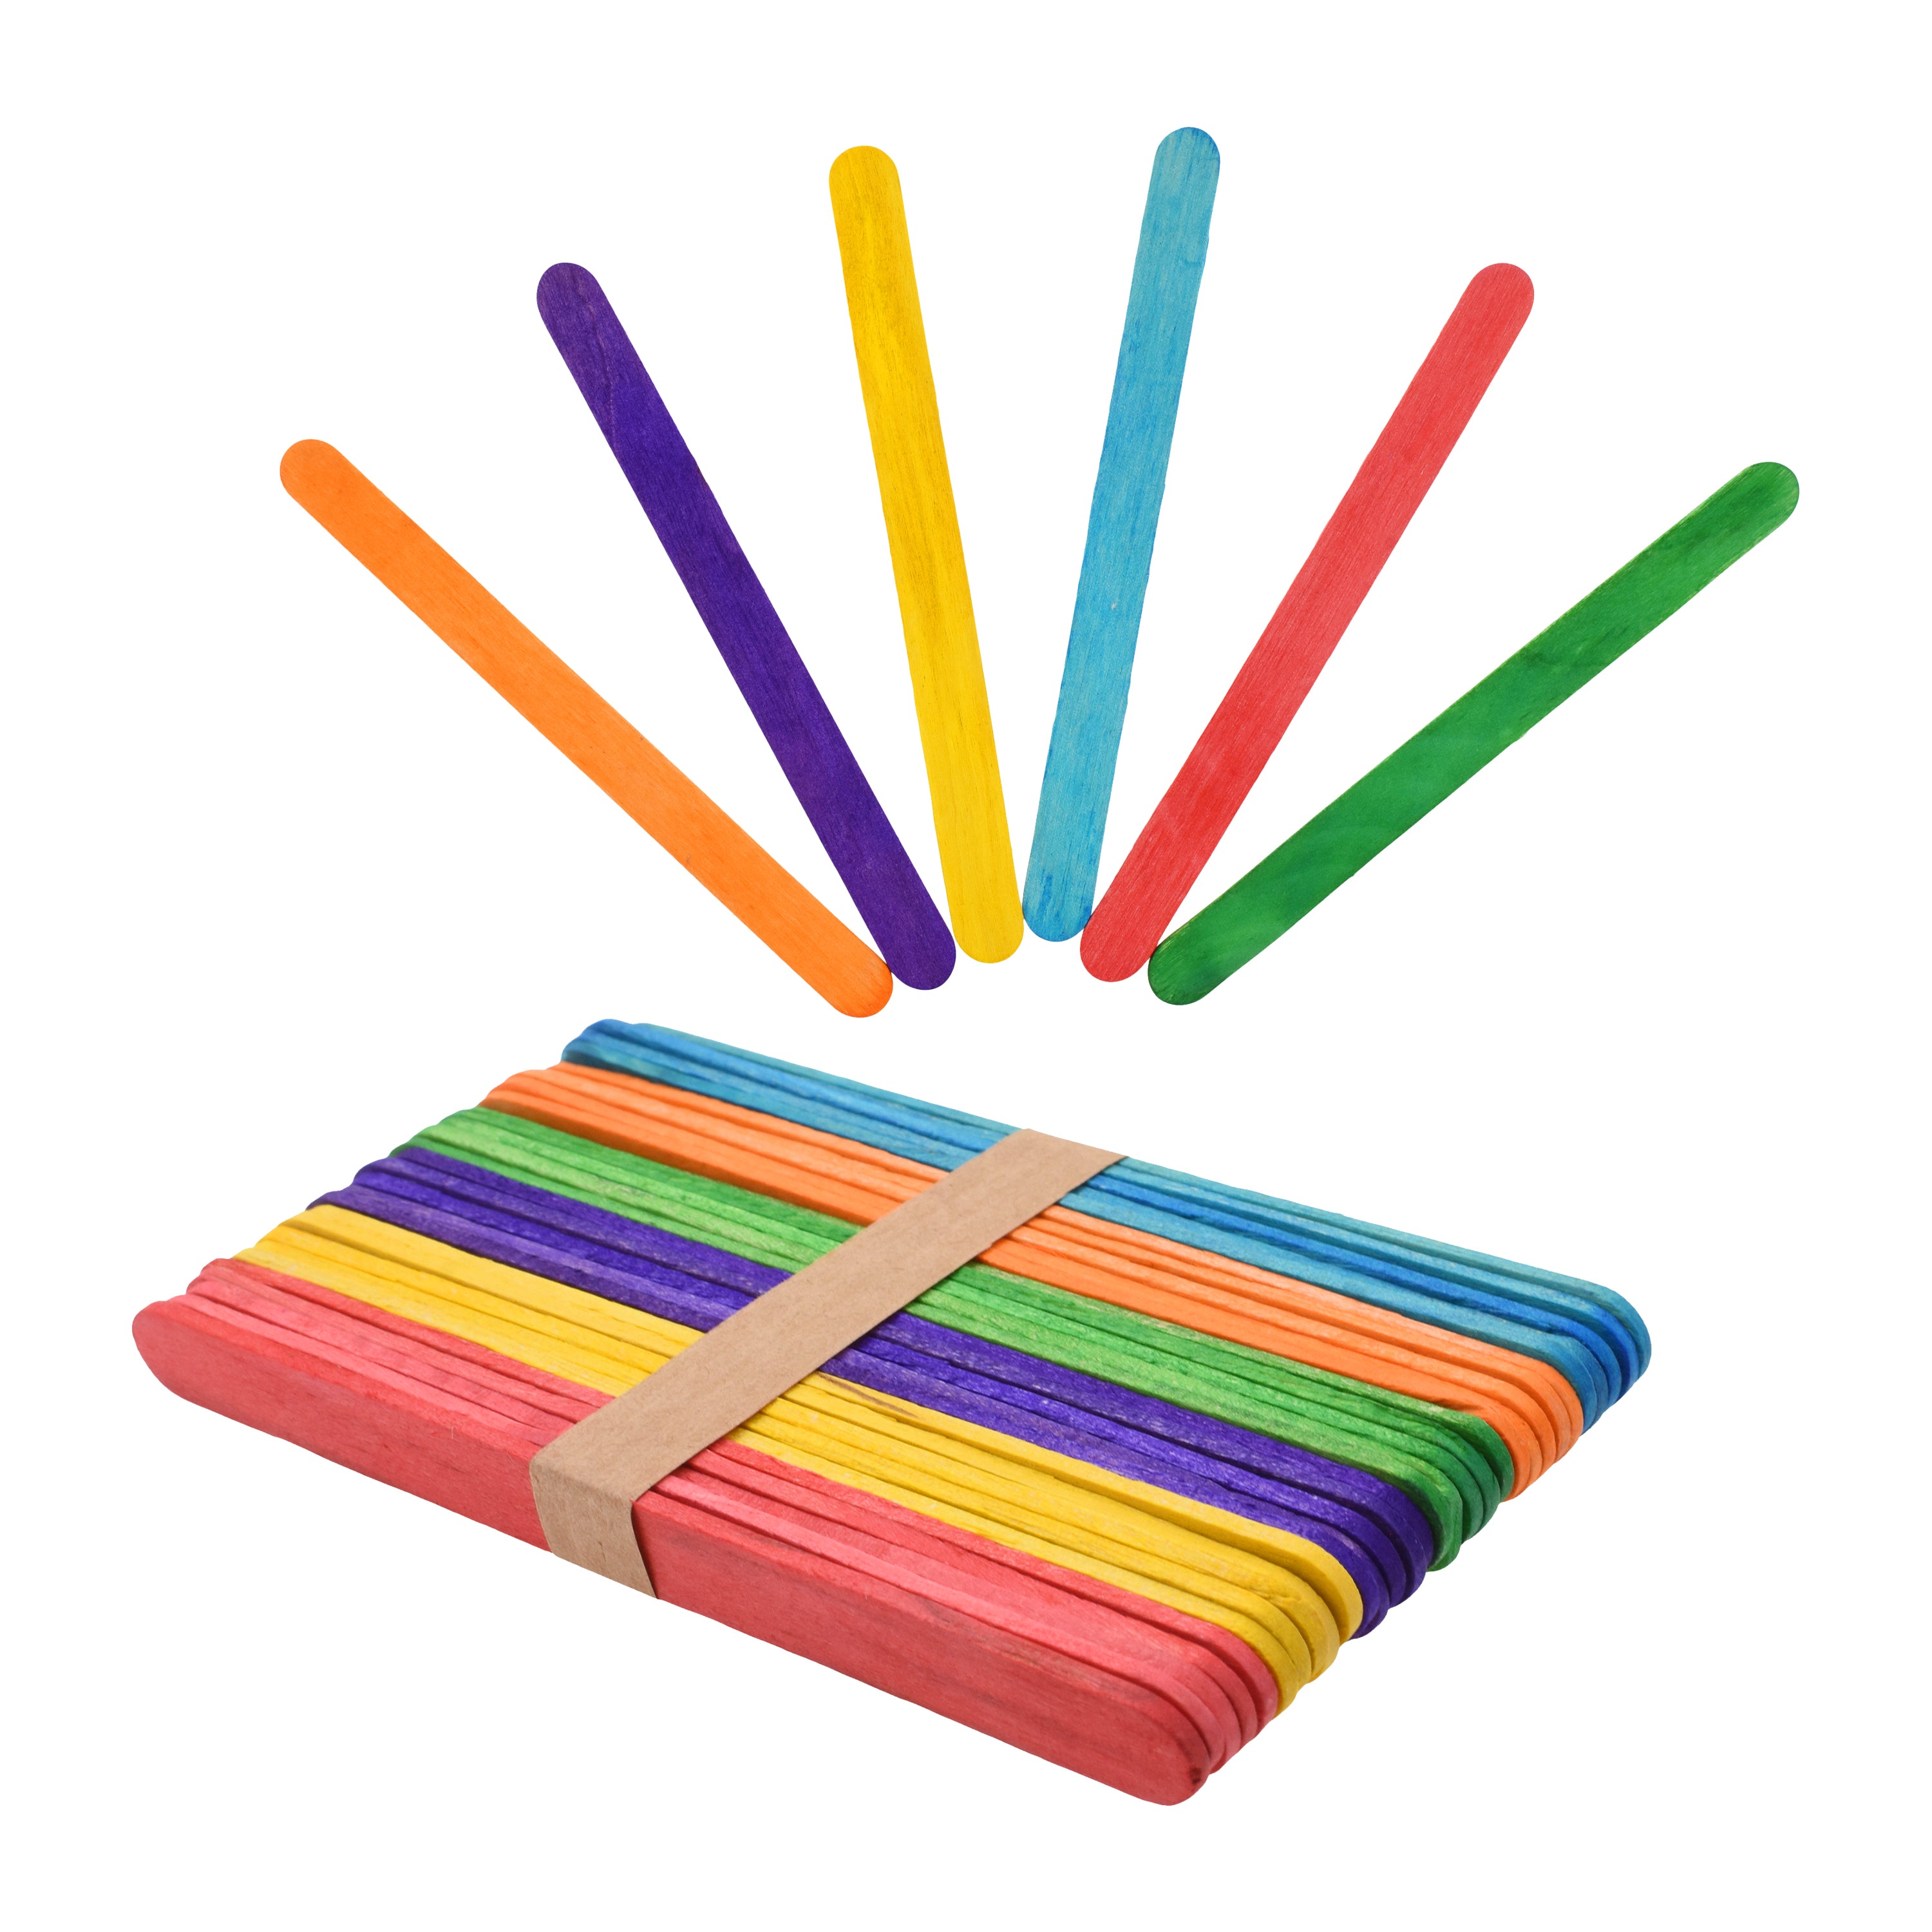 Popsicle Sticks for Crafts 200 Pcs 4.5 inch Wax Sticks Tongue